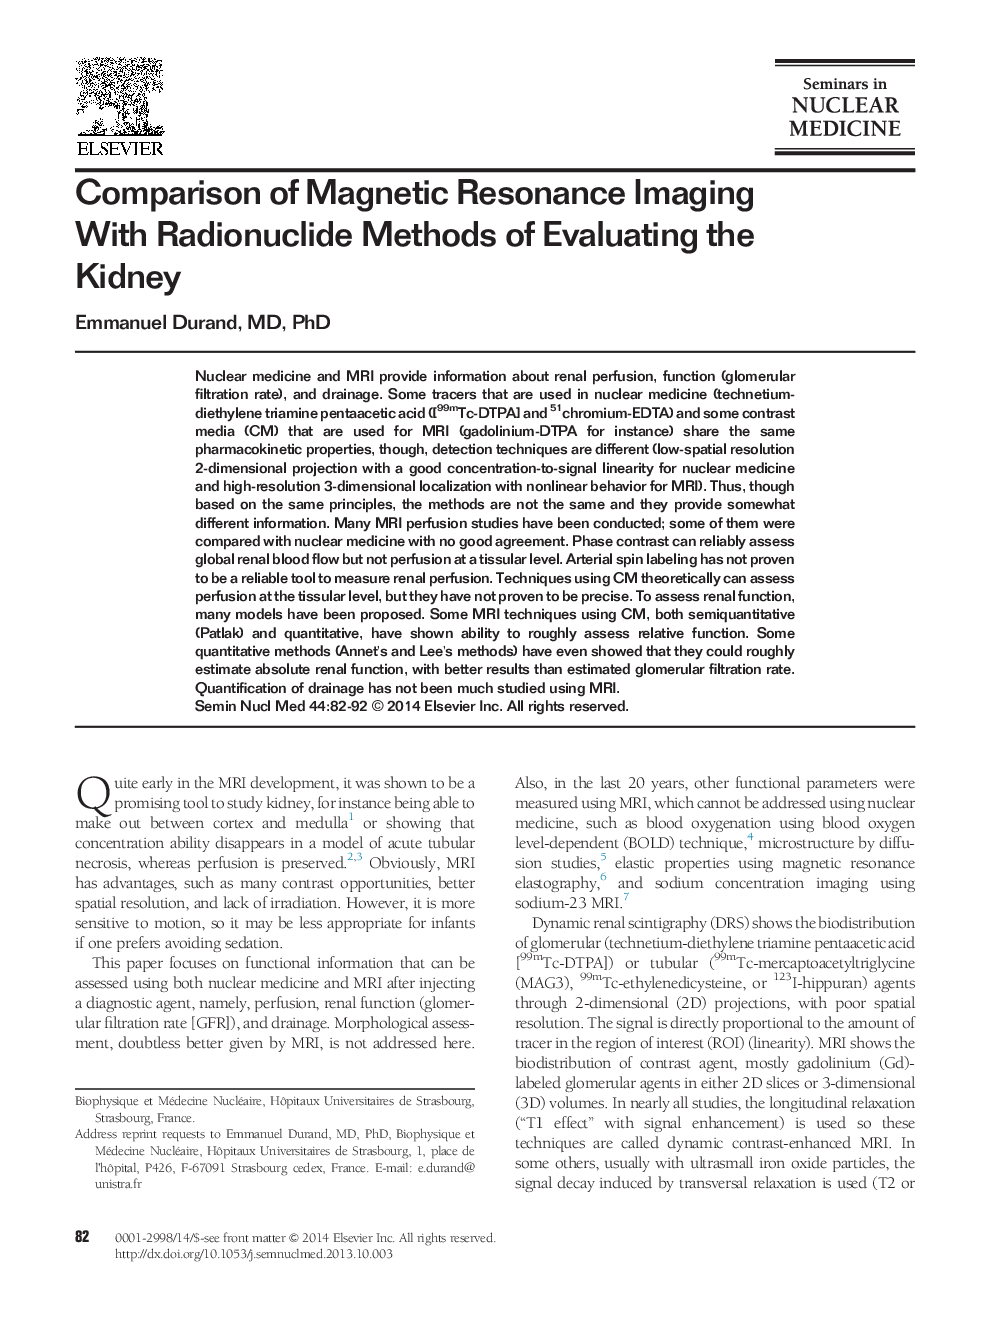 Comparison of Magnetic Resonance Imaging With Radionuclide Methods of Evaluating the Kidney